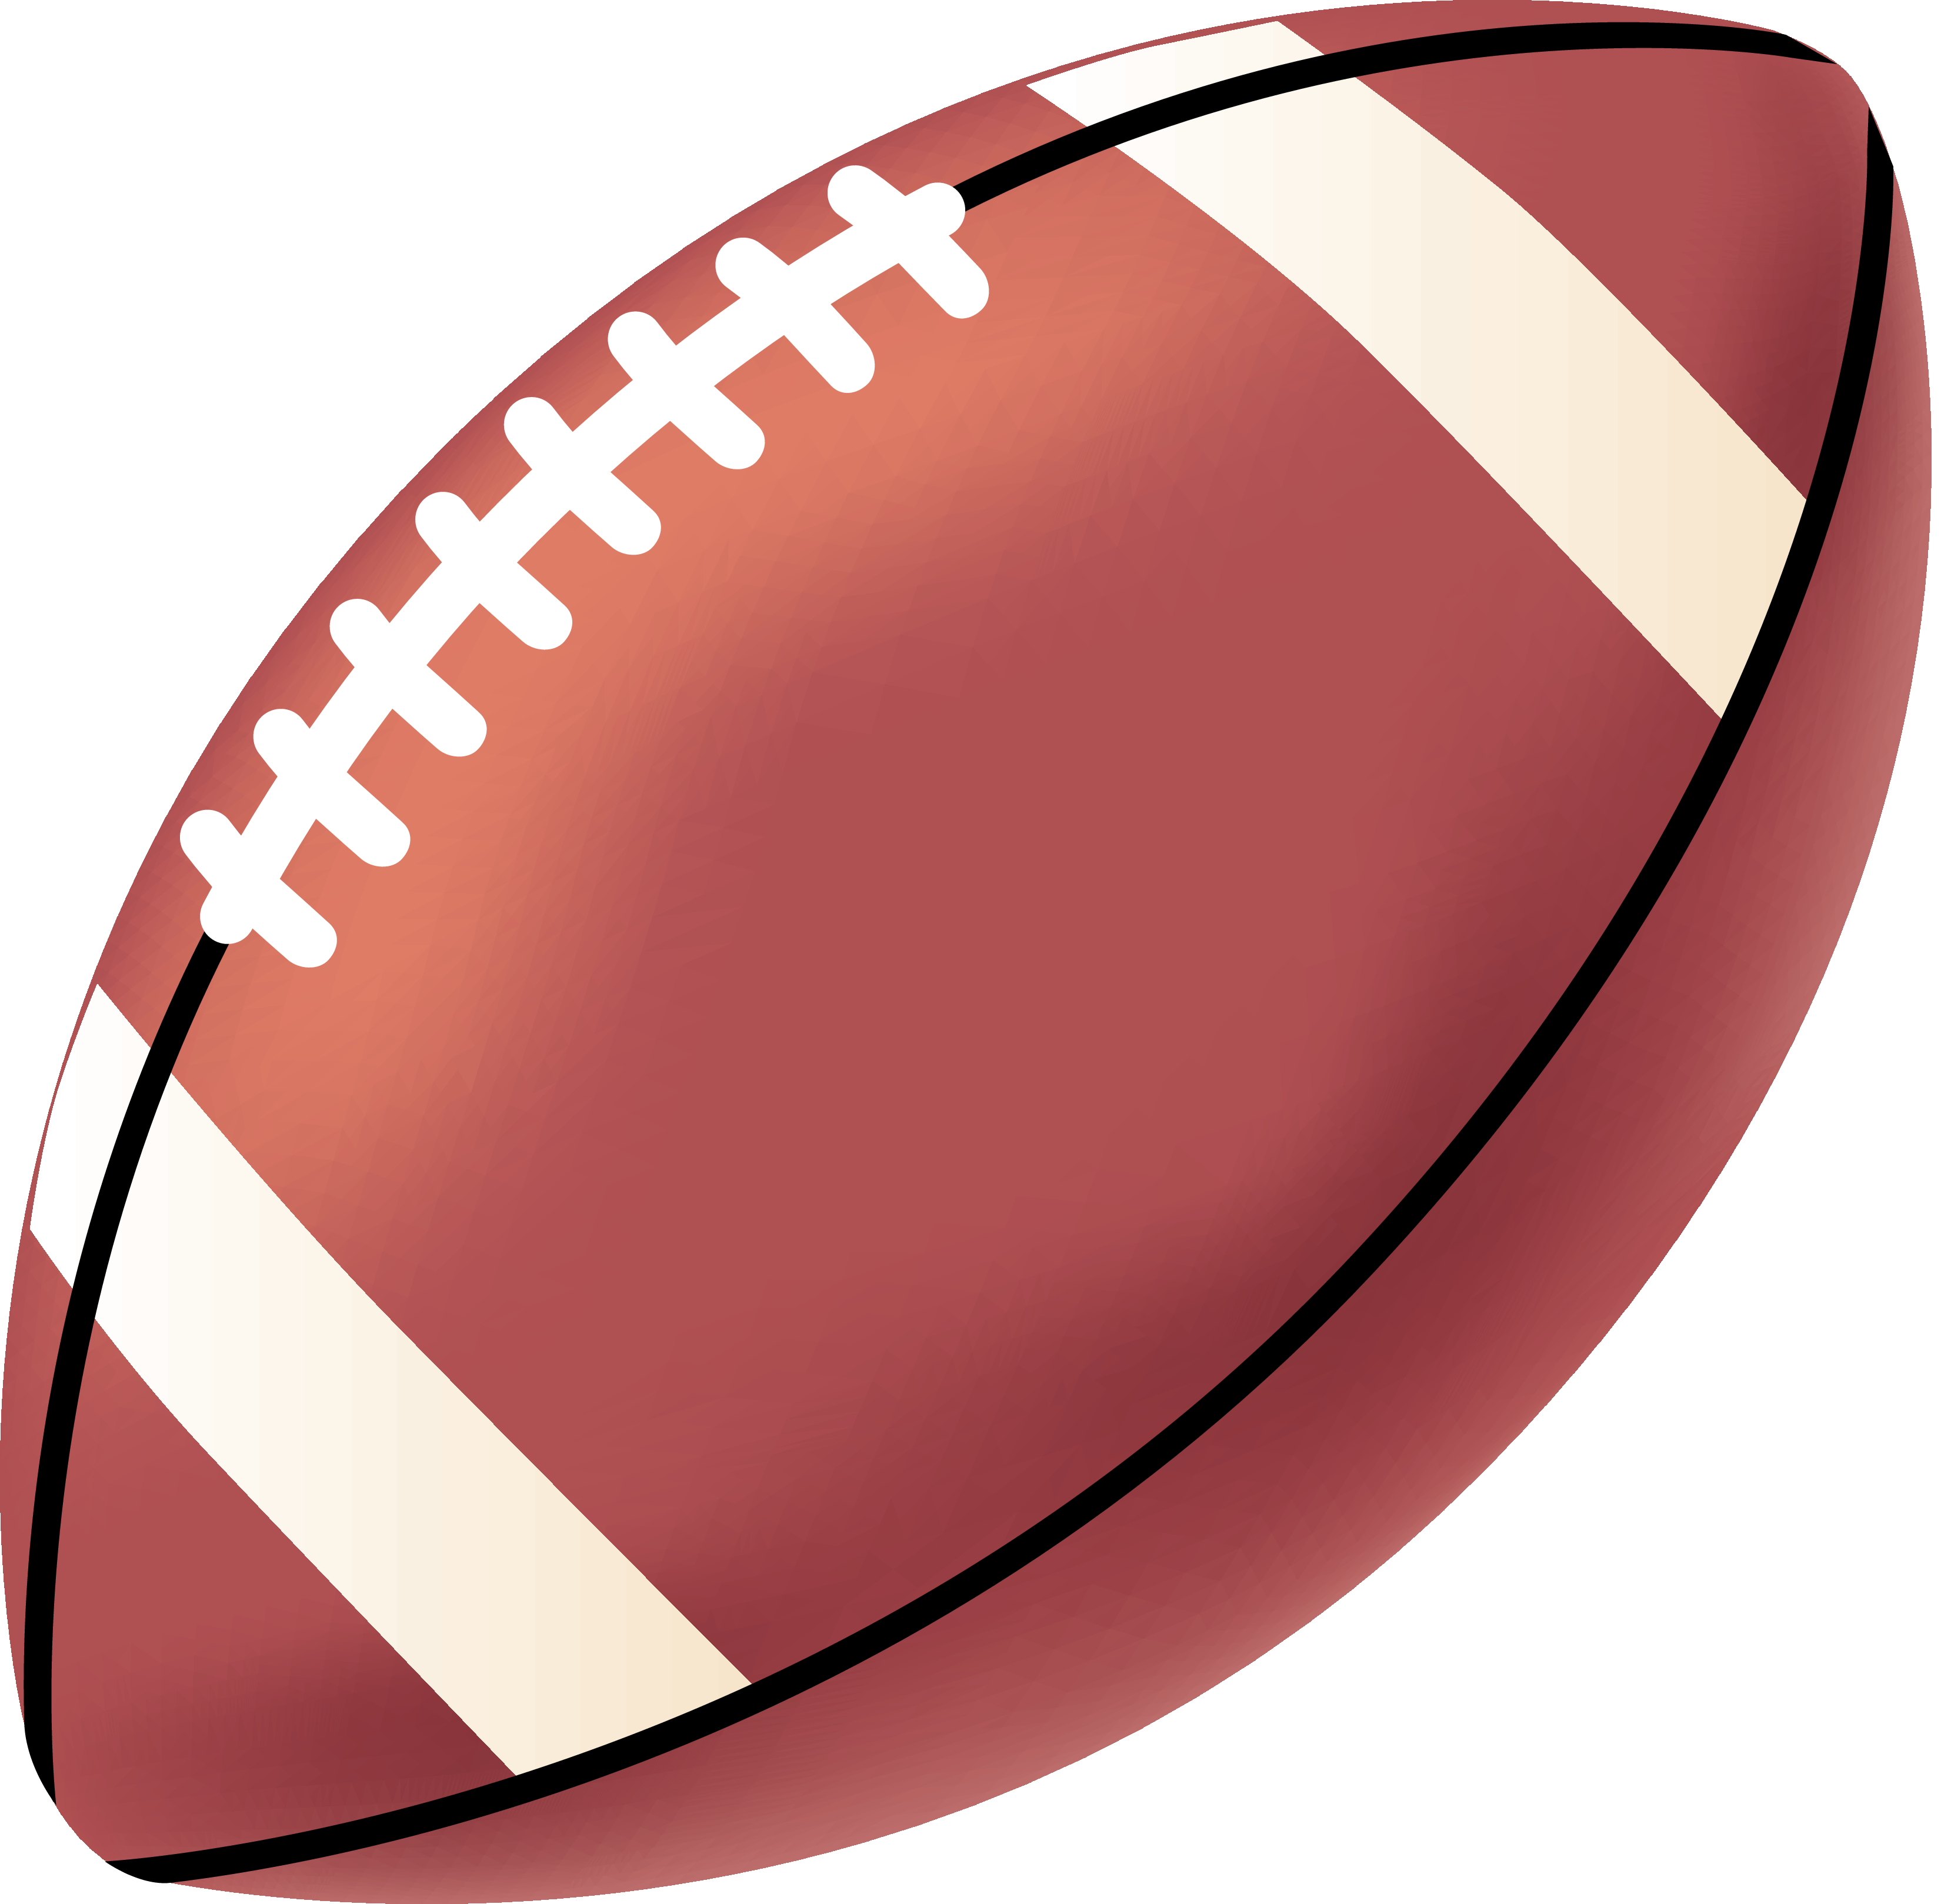 Free Printable Football Clipart at Free for personal